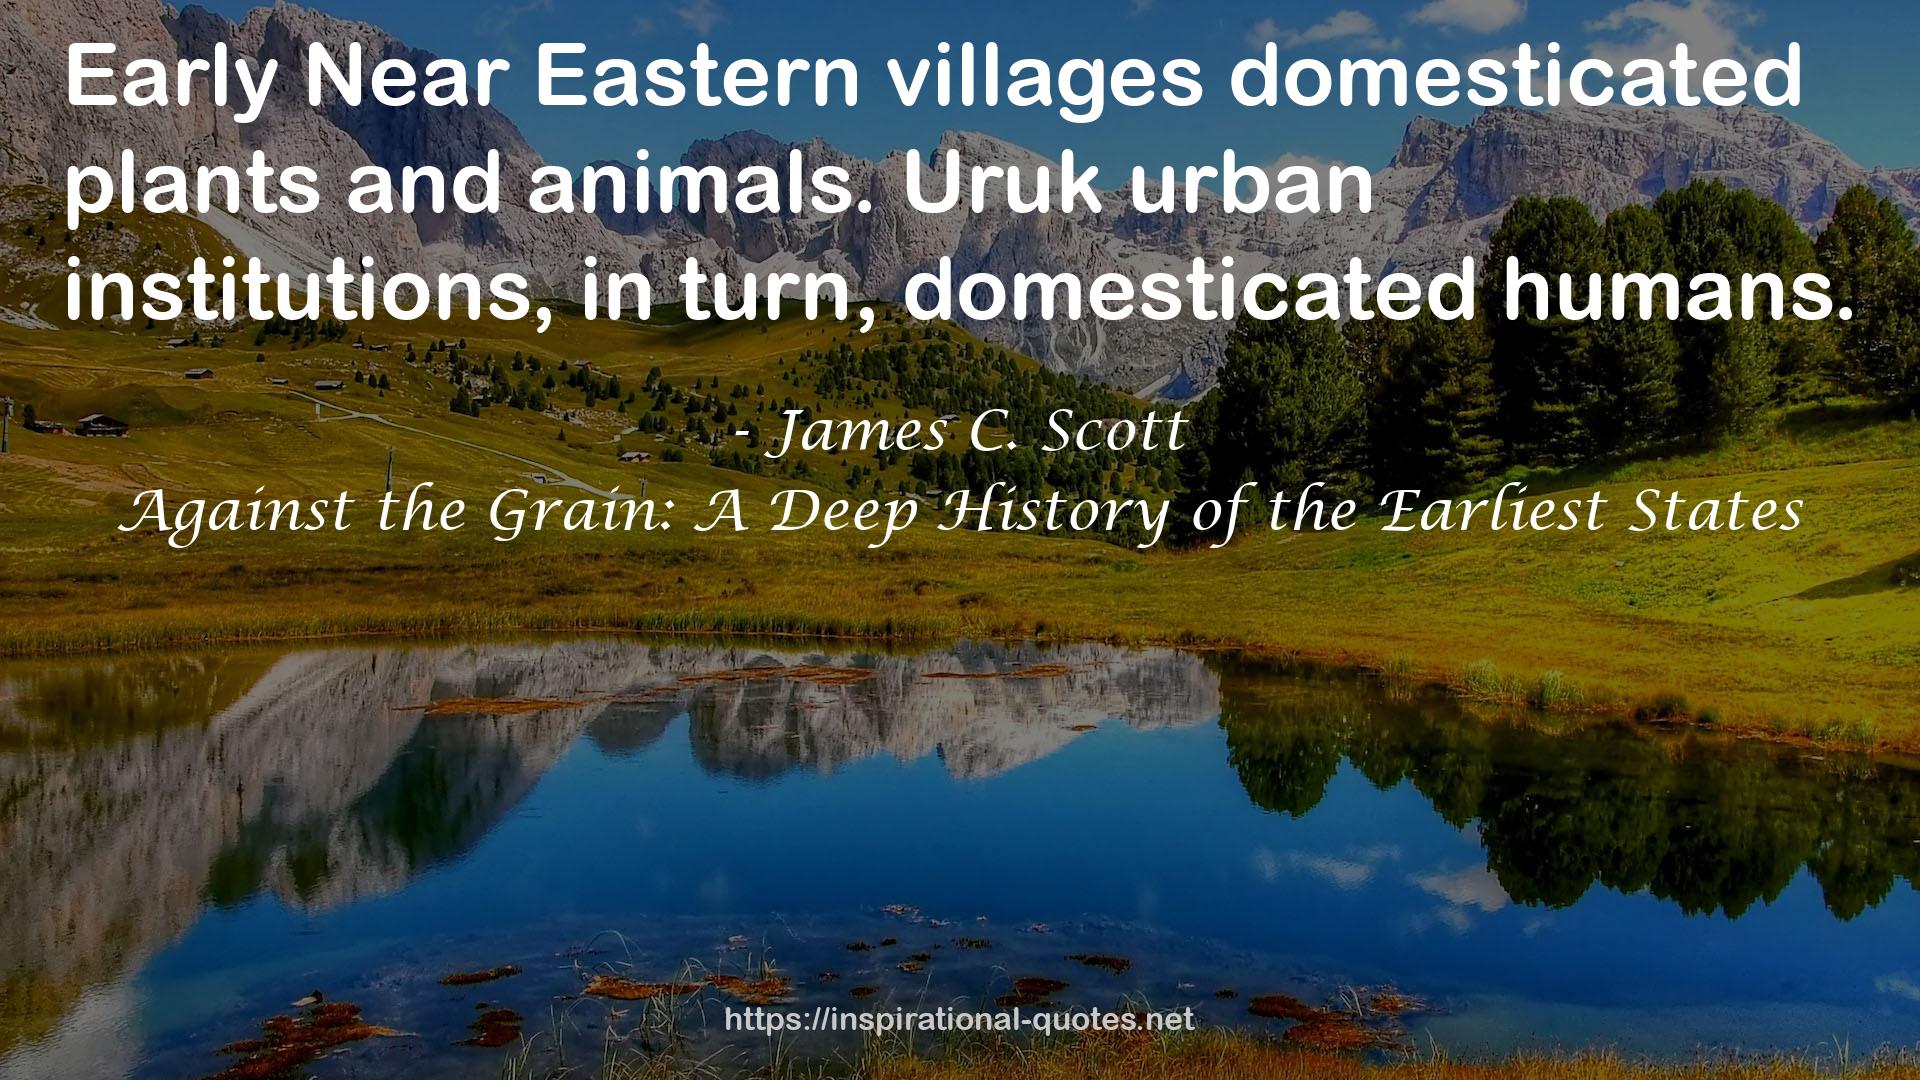 Against the Grain: A Deep History of the Earliest States QUOTES